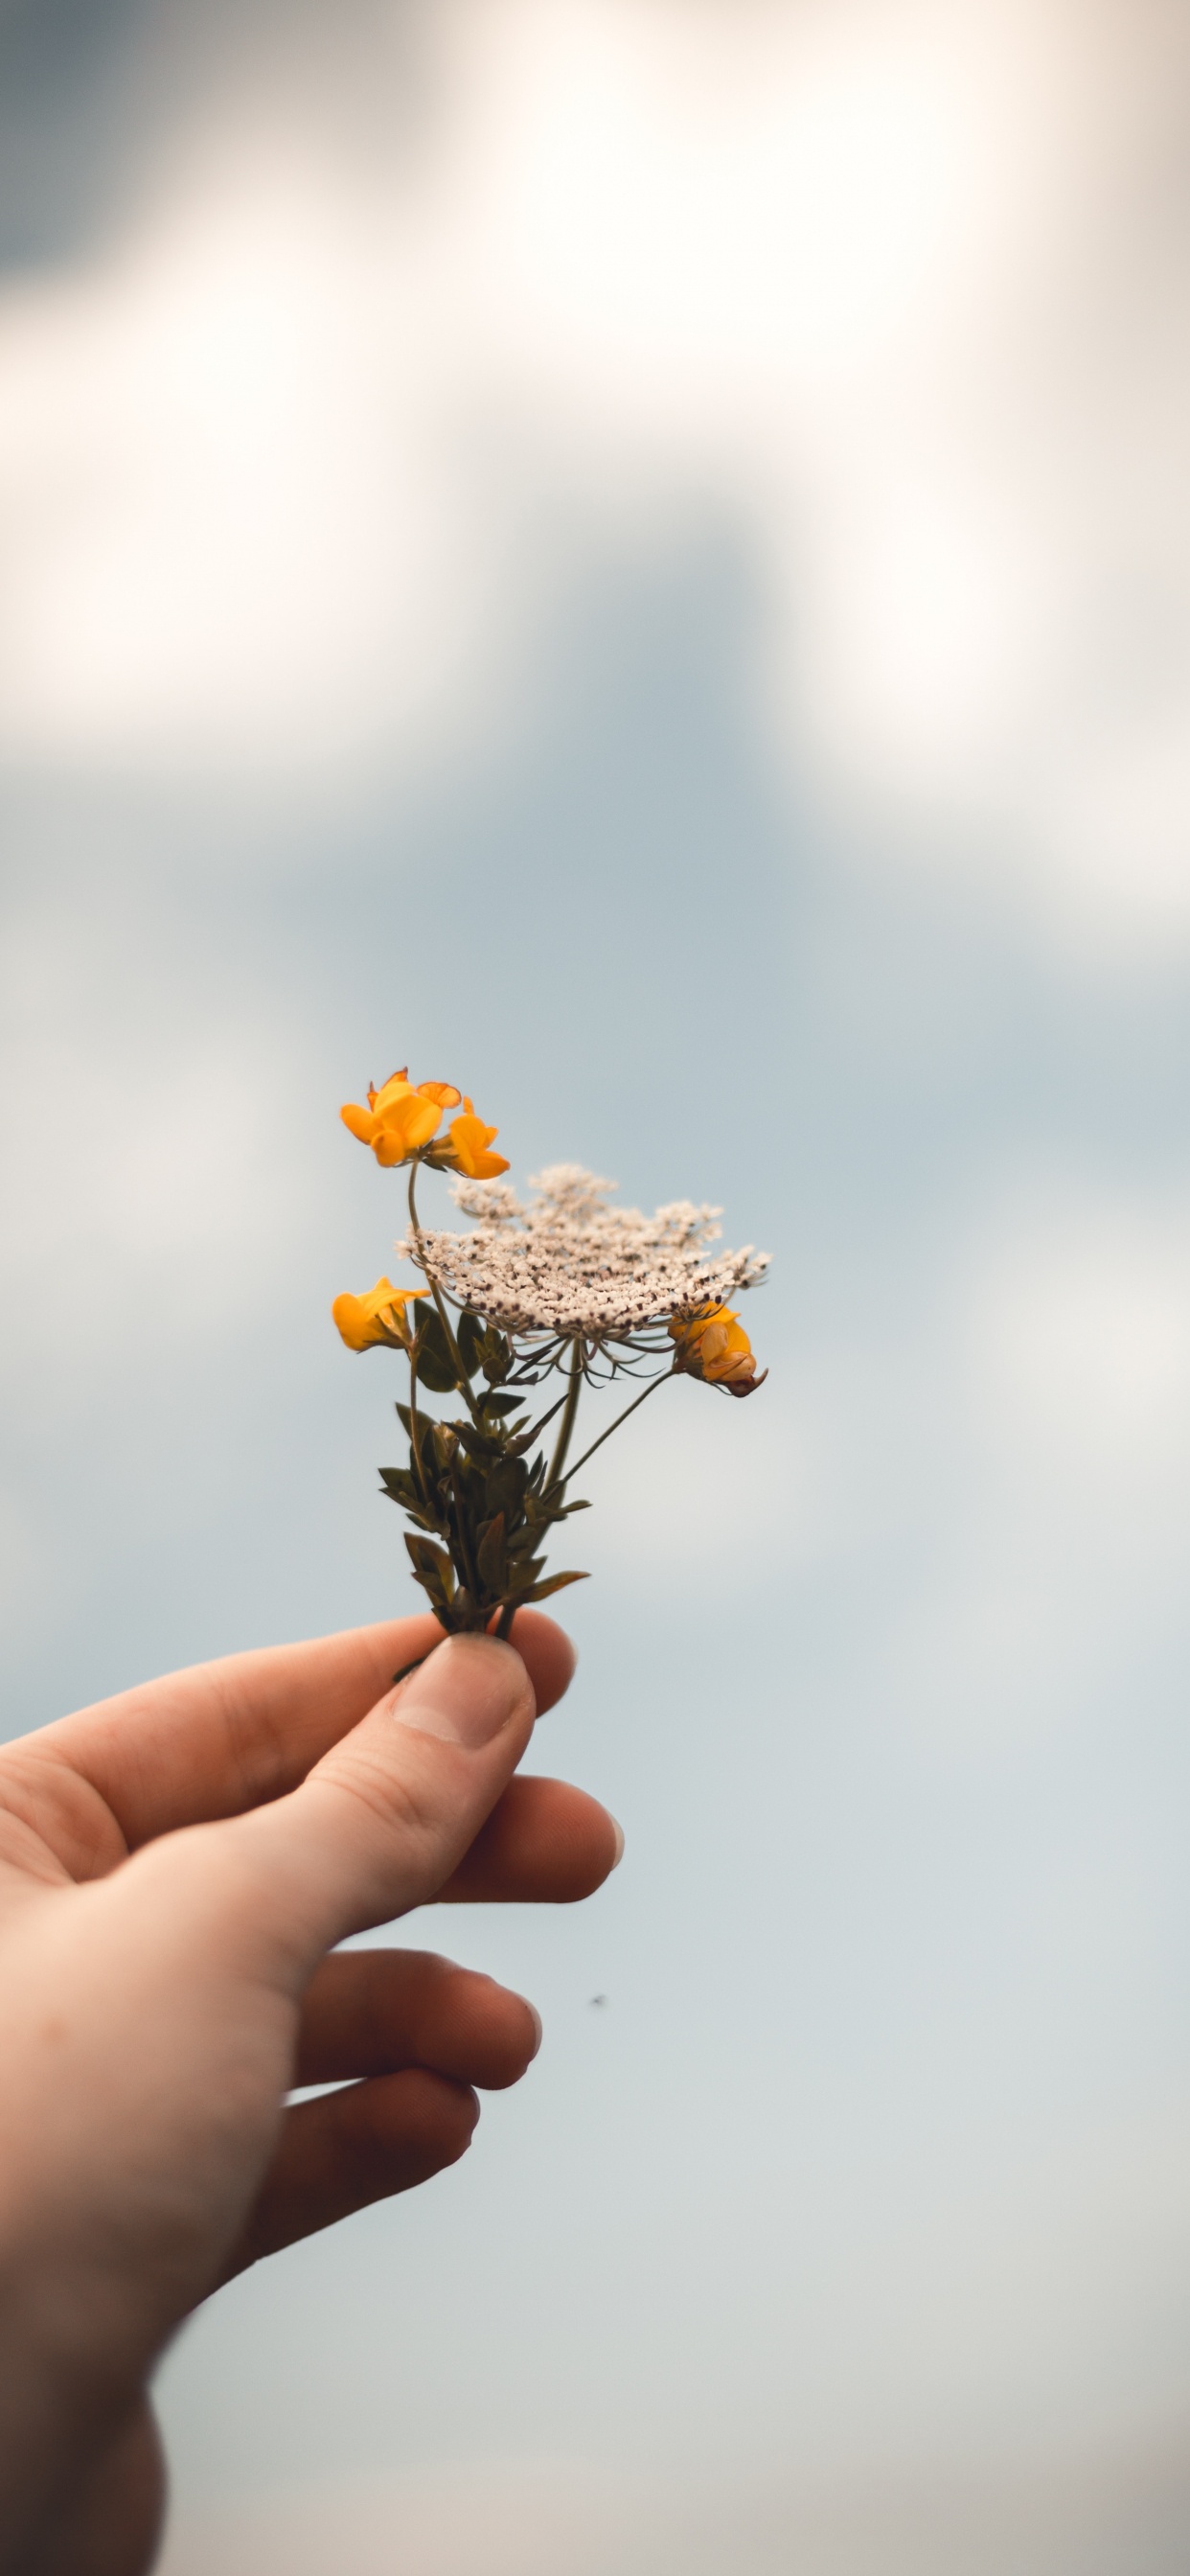 Person Holding Yellow and Brown Flower. Wallpaper in 1242x2688 Resolution